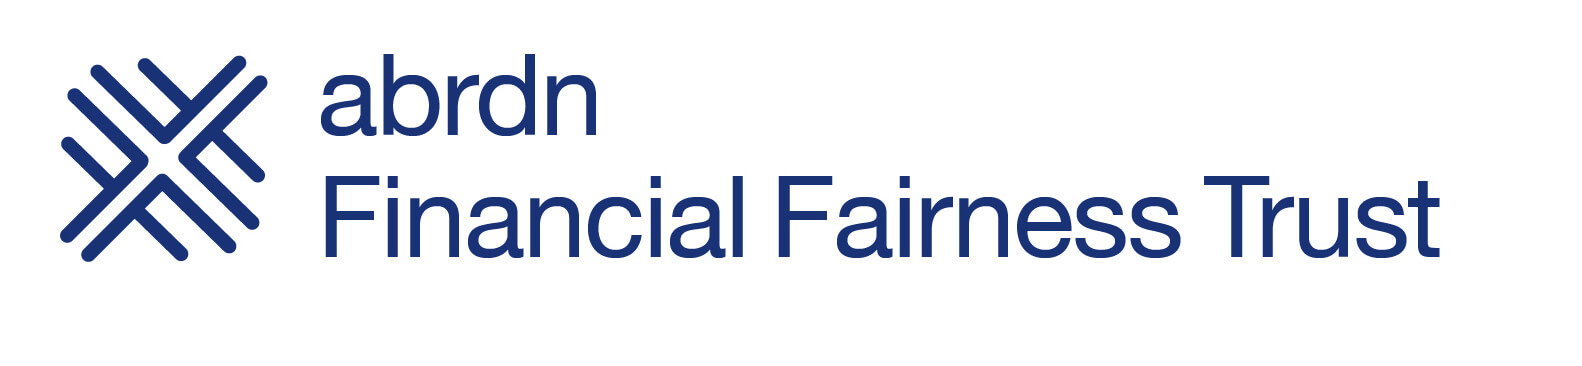 The logo of abrdn Financial Fairness Trust. Blue text on a white background.